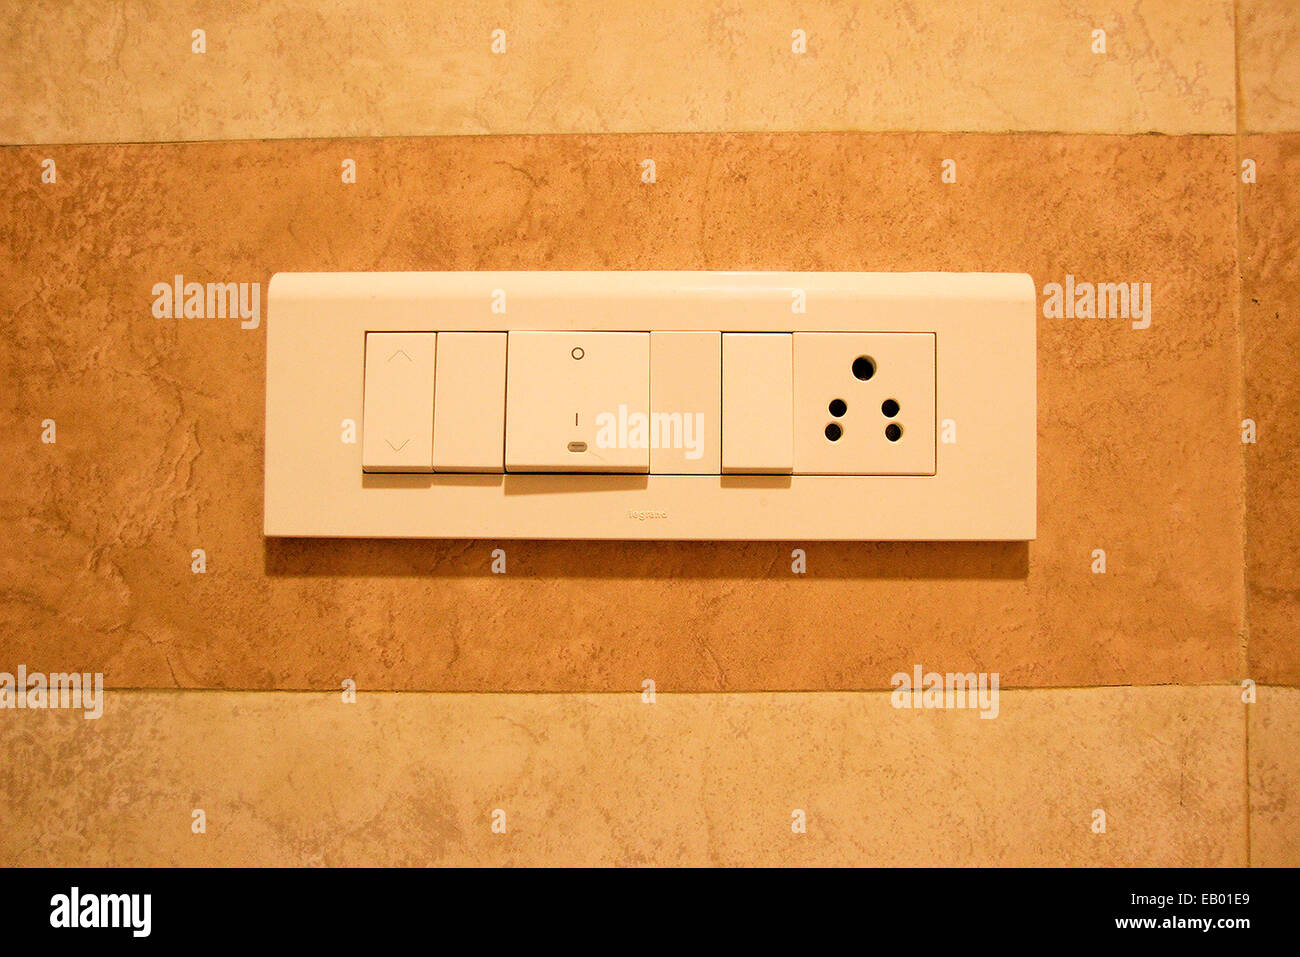 Neat panel of electrical switches and plug points on wall Stock Photo